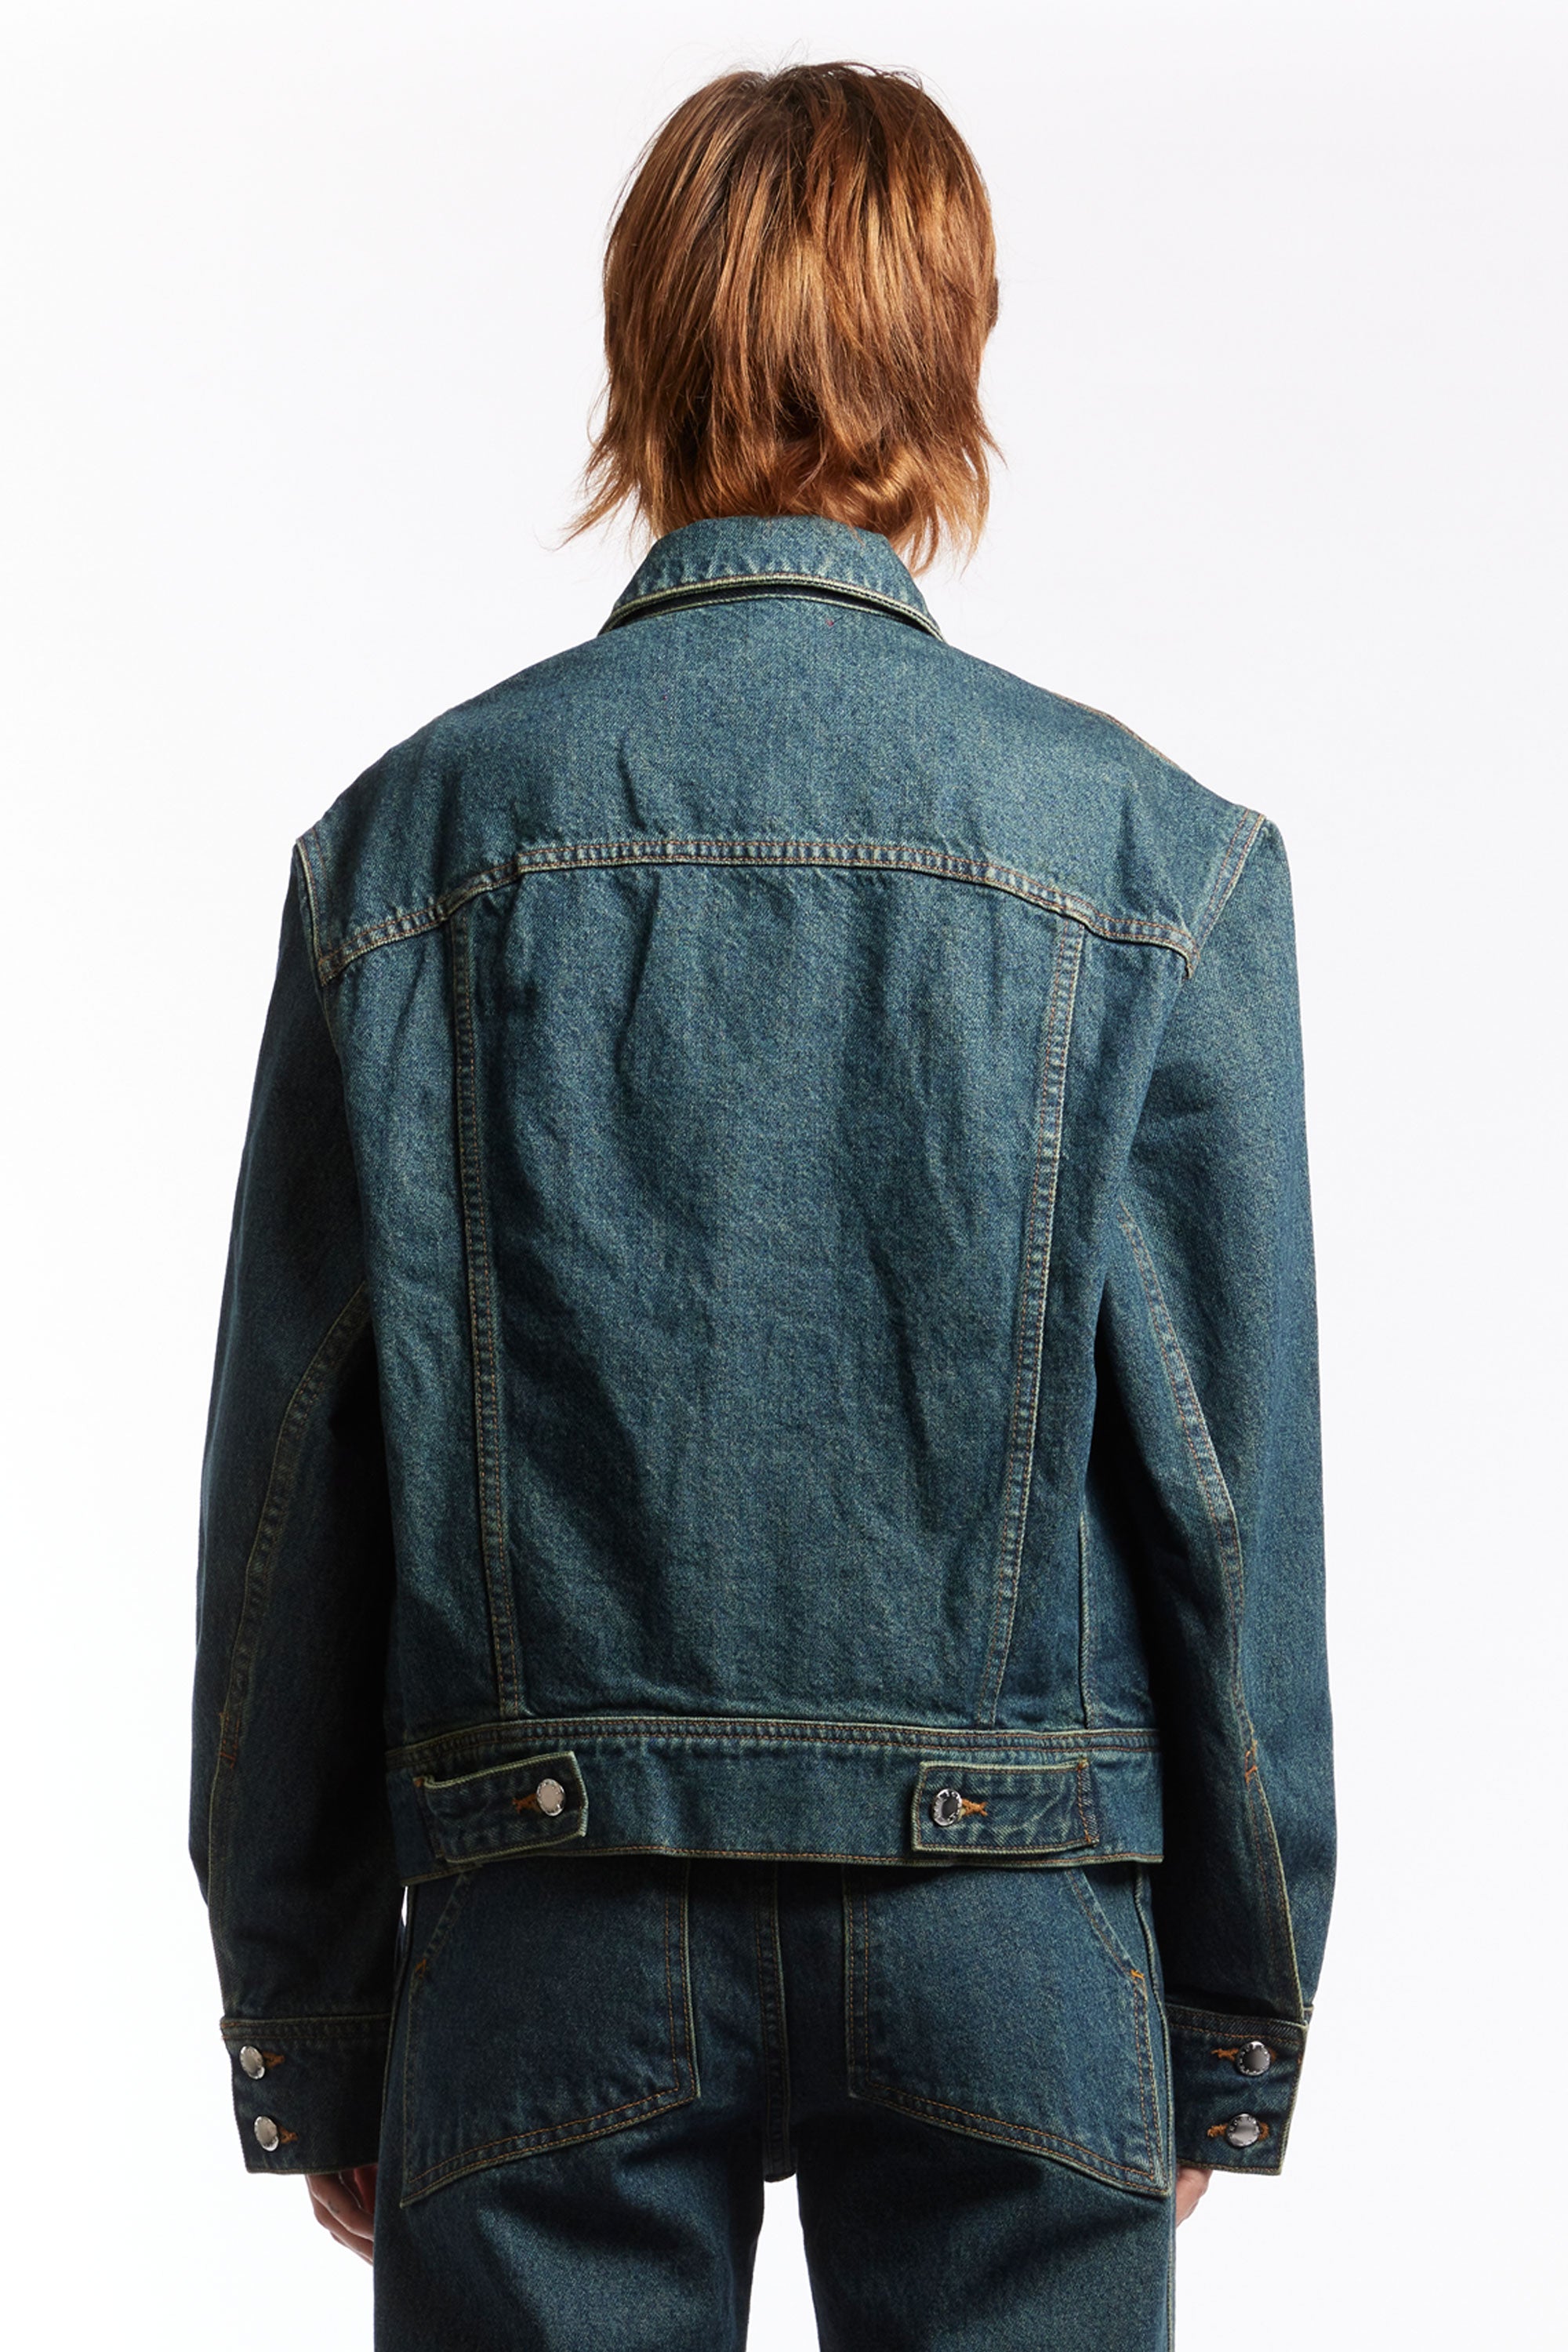 The ECKHAUS LATTA - EL JACKET NEW BLUE  available online with global shipping, and in PAM Stores Melbourne and Sydney.